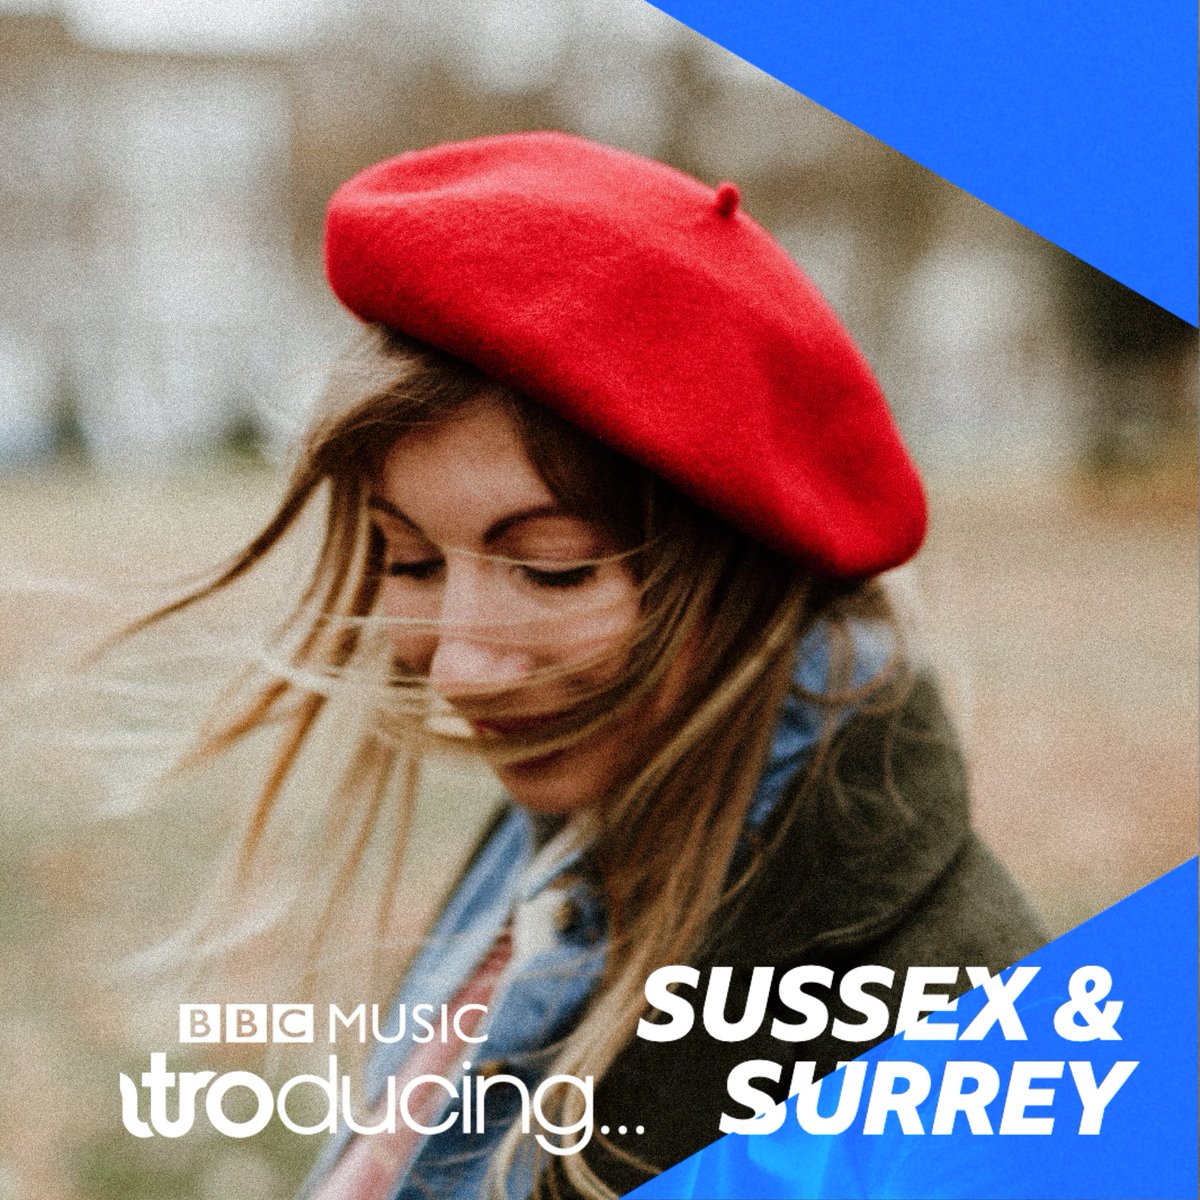 Thank you @MelitaRadio @bbcintroducing for playing my song 'Traditions' about being single at Christmas on the Surrey festive show tonight! So grateful for all your support this year ❤️